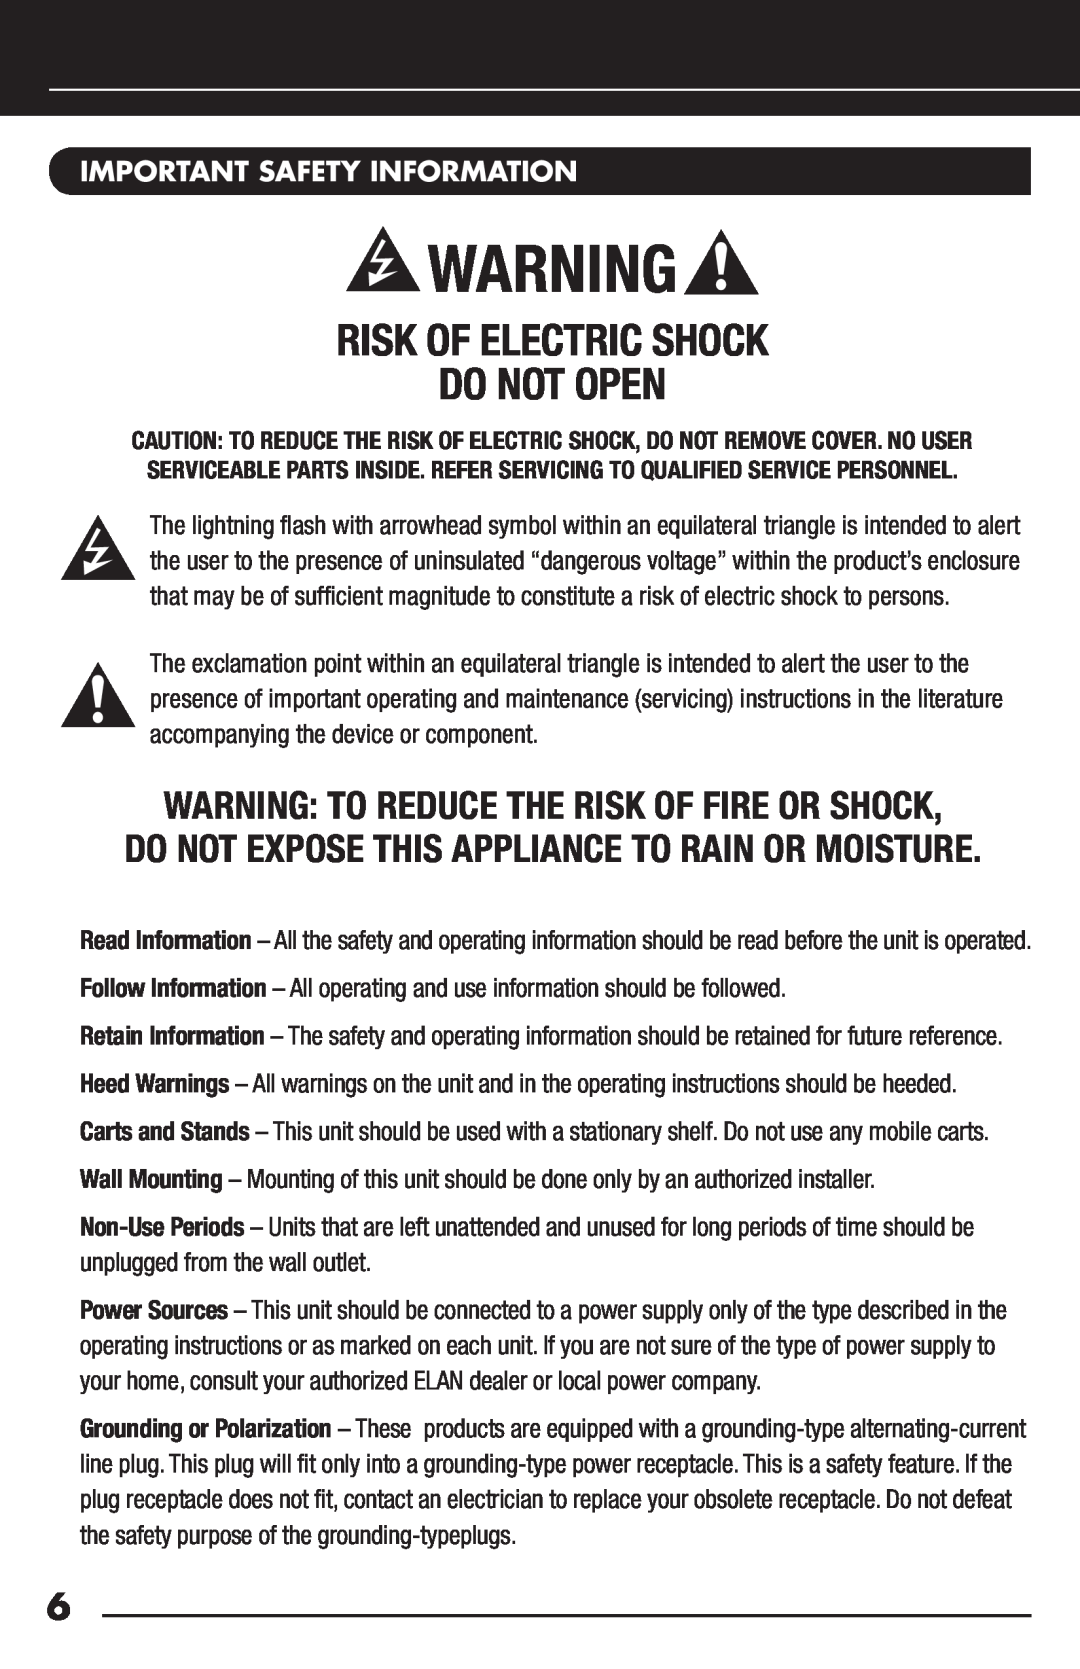 Niles Audio FM-1R manual Risk of electric shock Do not open, Warning To reduce the risk of fire or shock 